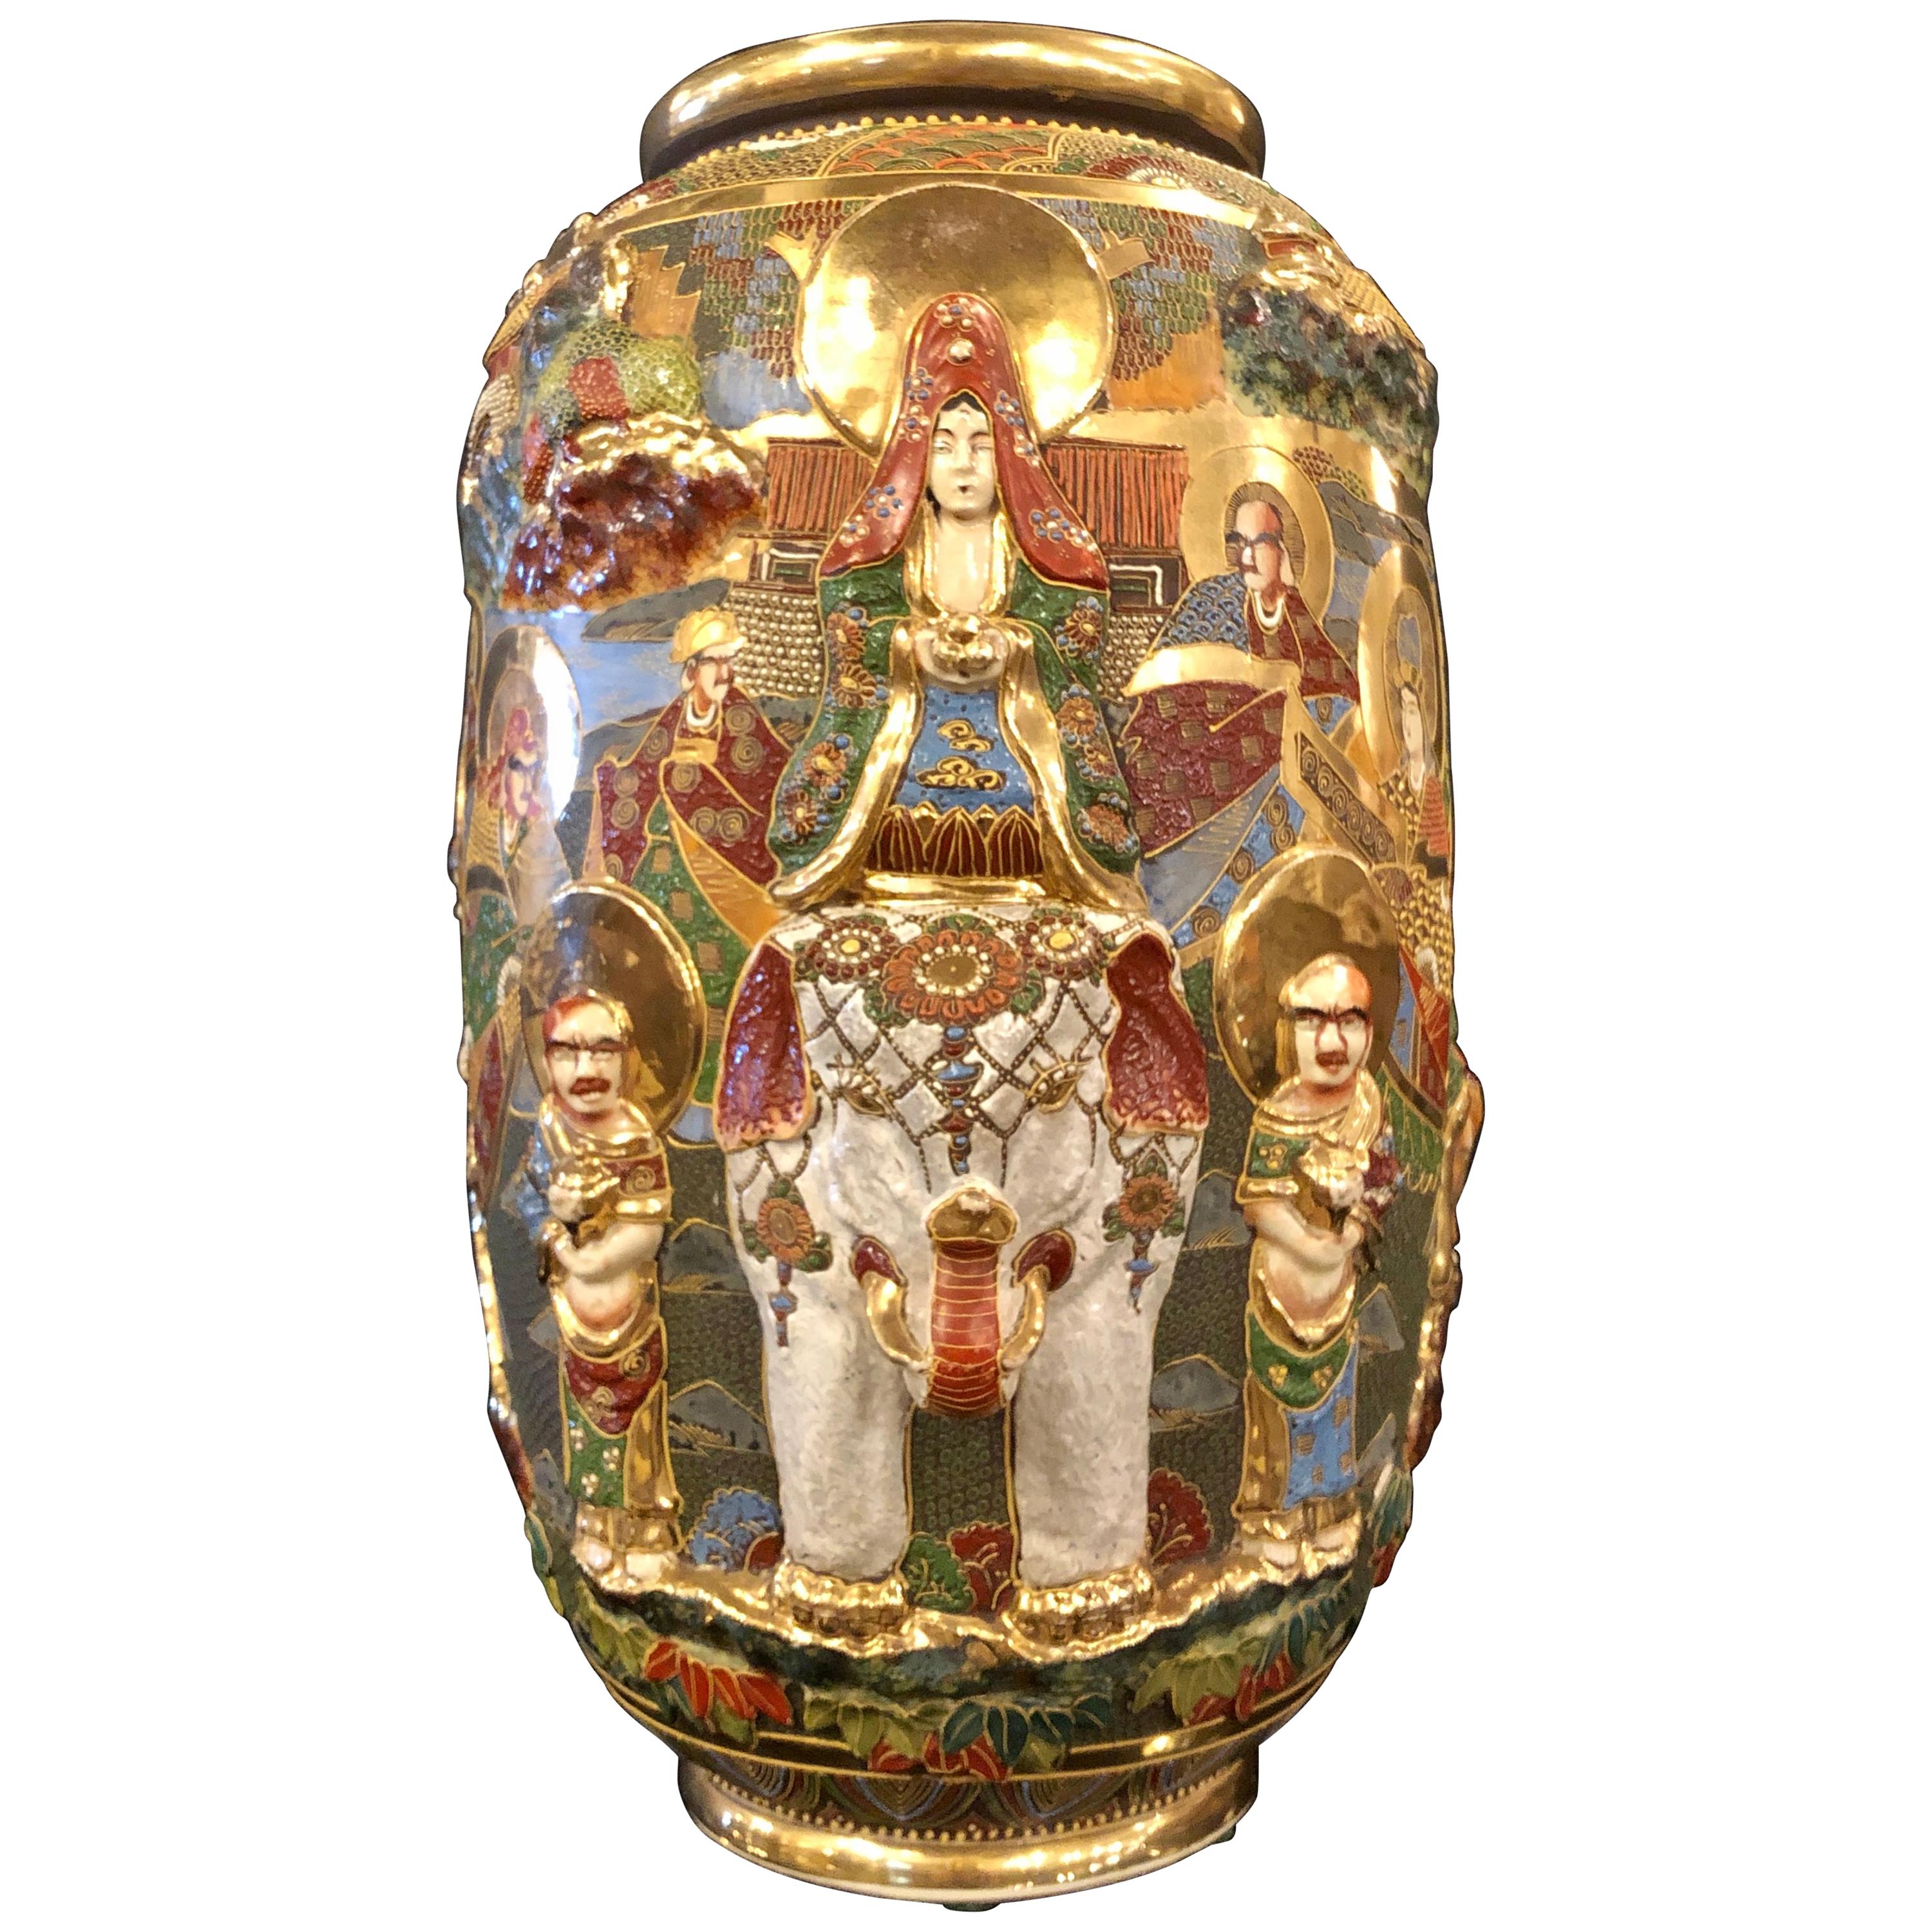 Japanese Satsuma Vase with Gold Gilt High Relief Decoration Depicting a Goddess